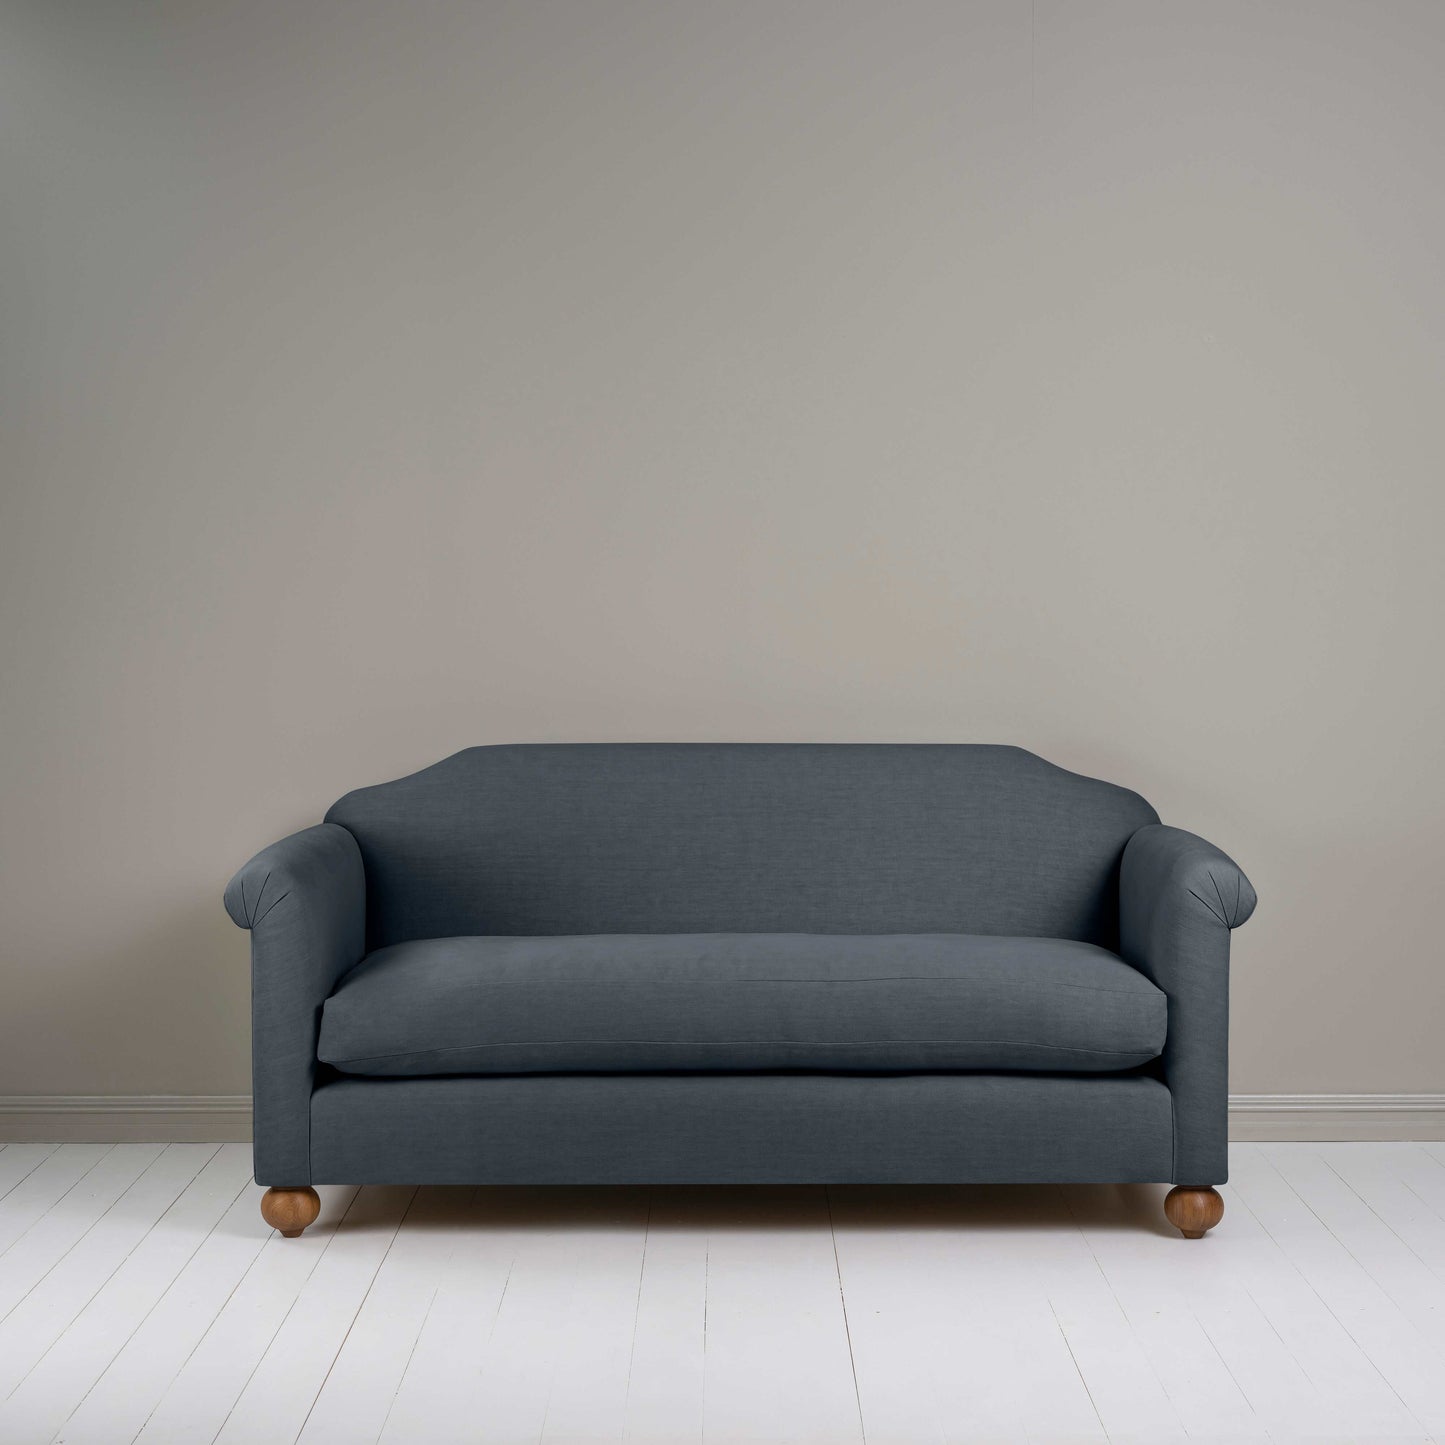 Dolittle 3 Seater Sofa in Laidback Linen Midnight